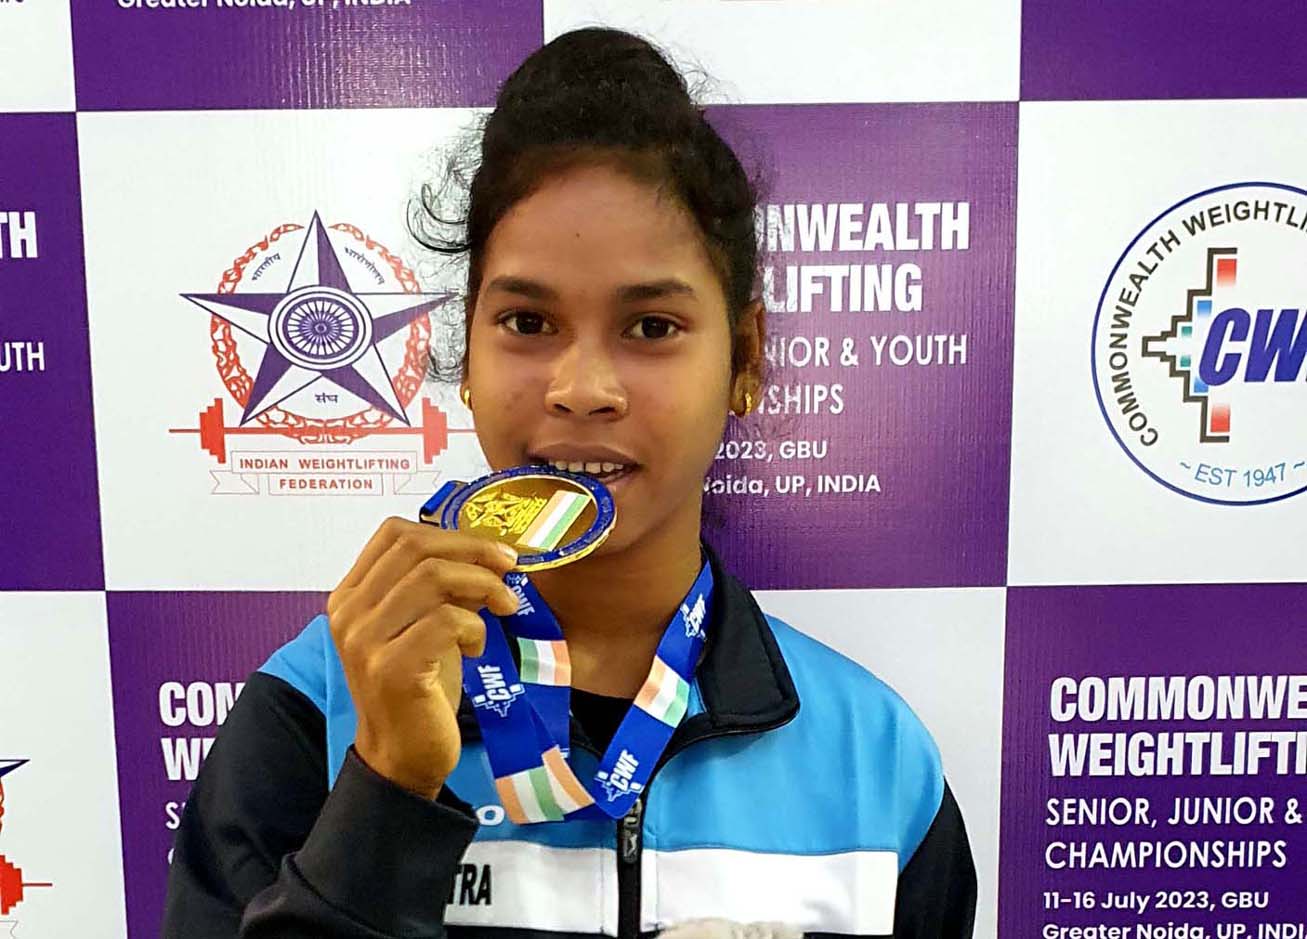 Odisha lifter Jyoshna Sabar poses with her gold medal at the Commonwealth Weightlifting Championships in Greater Noida, Uttar Pradesh on 12 July 2023.